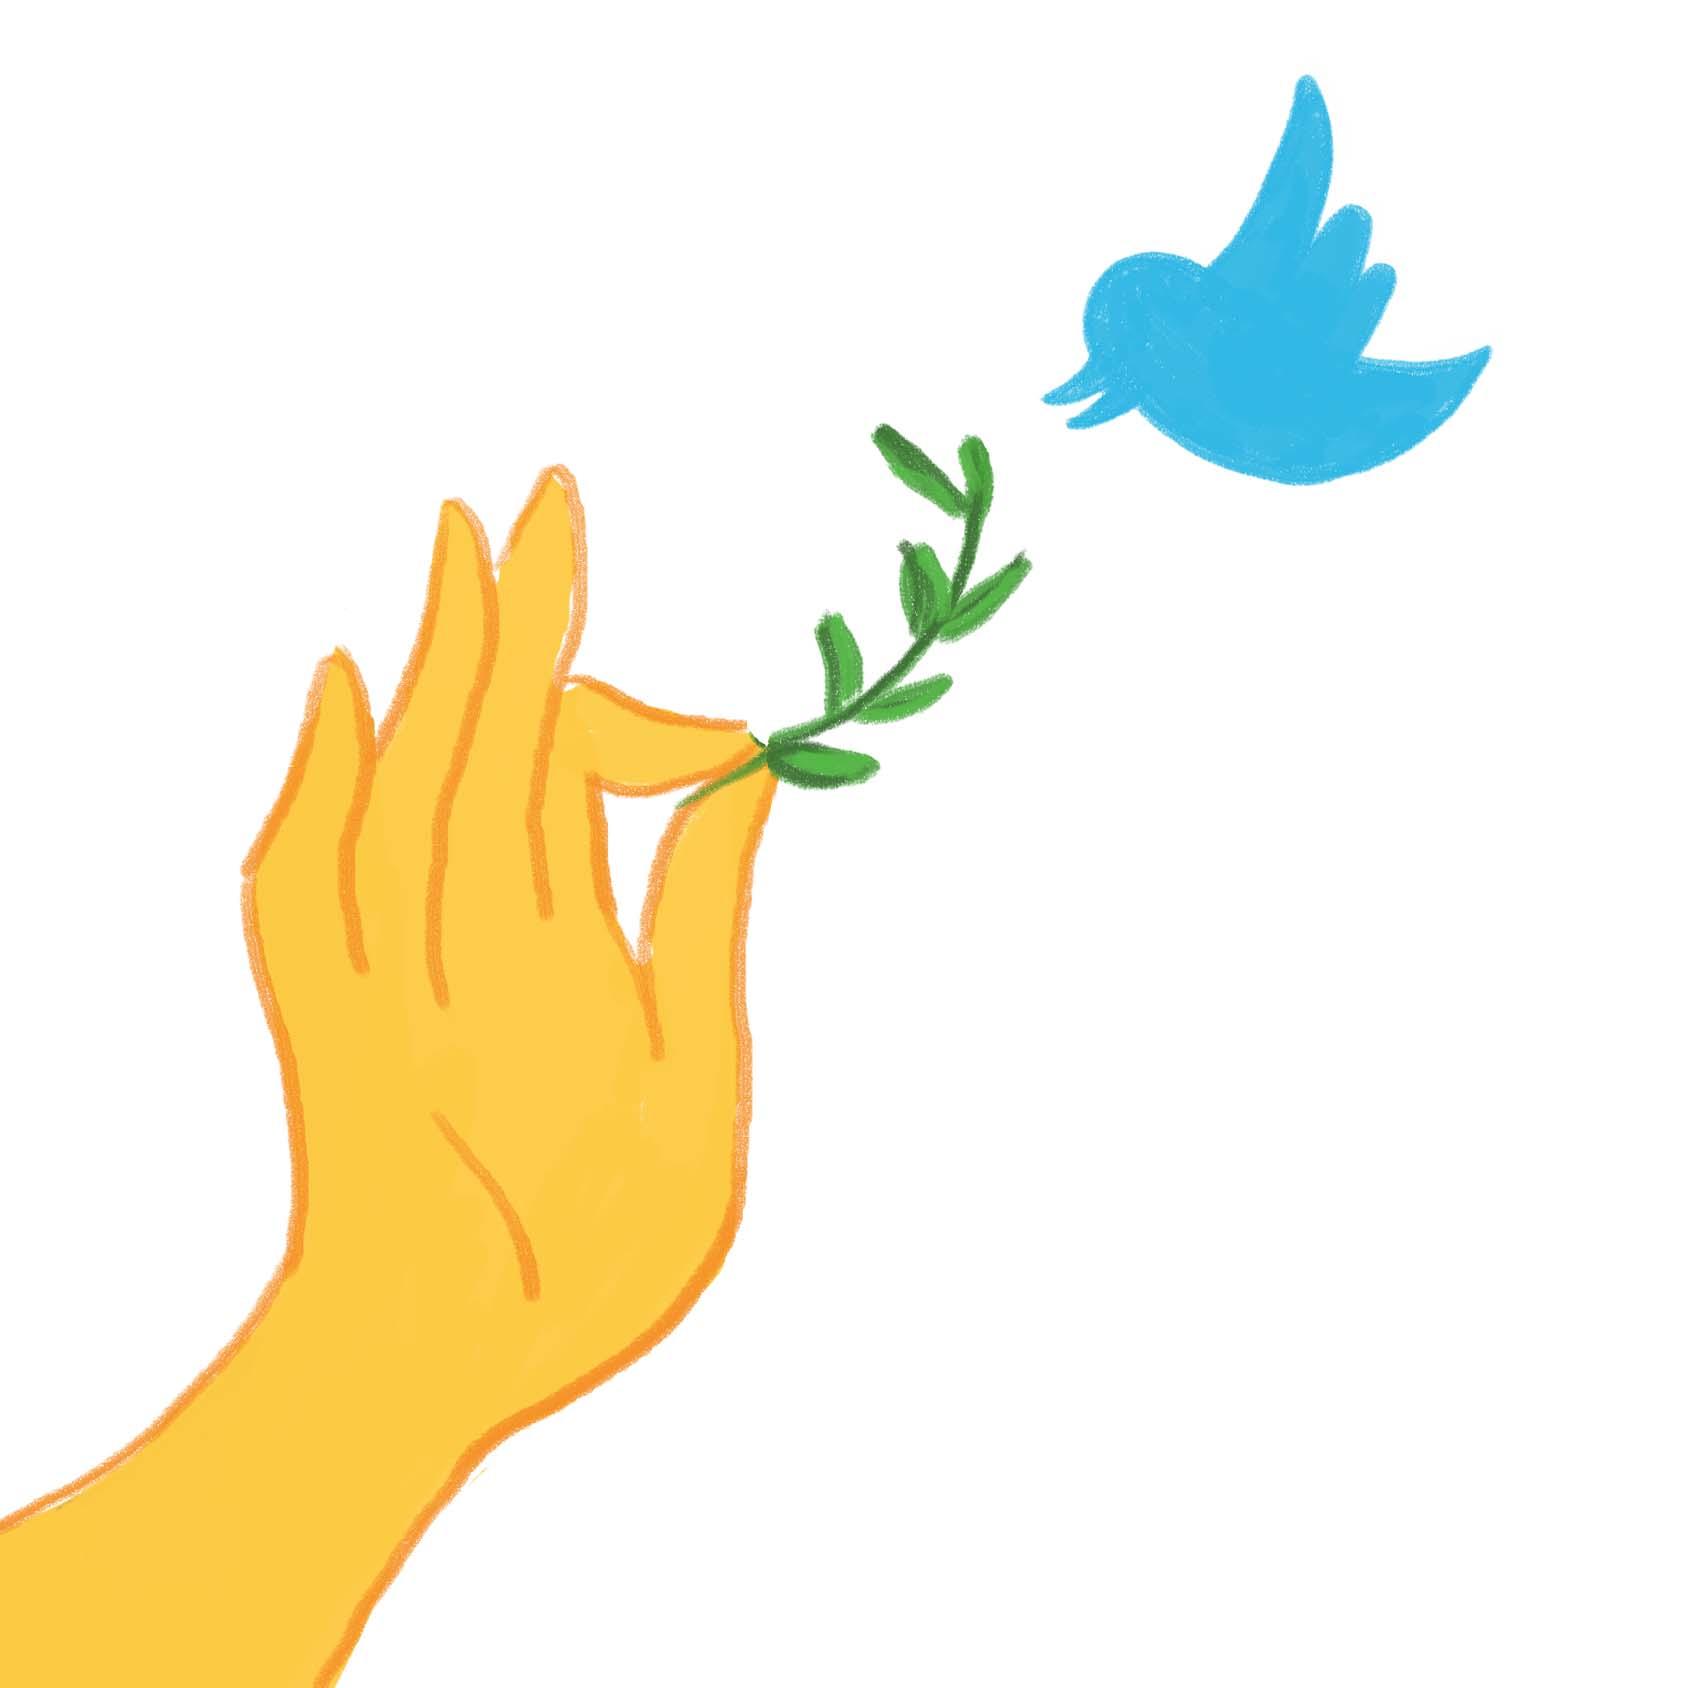 Artistic rendition of a hand in Buddhist hand gesturing reaching out with vine to bird, in shape of the Twitter logo